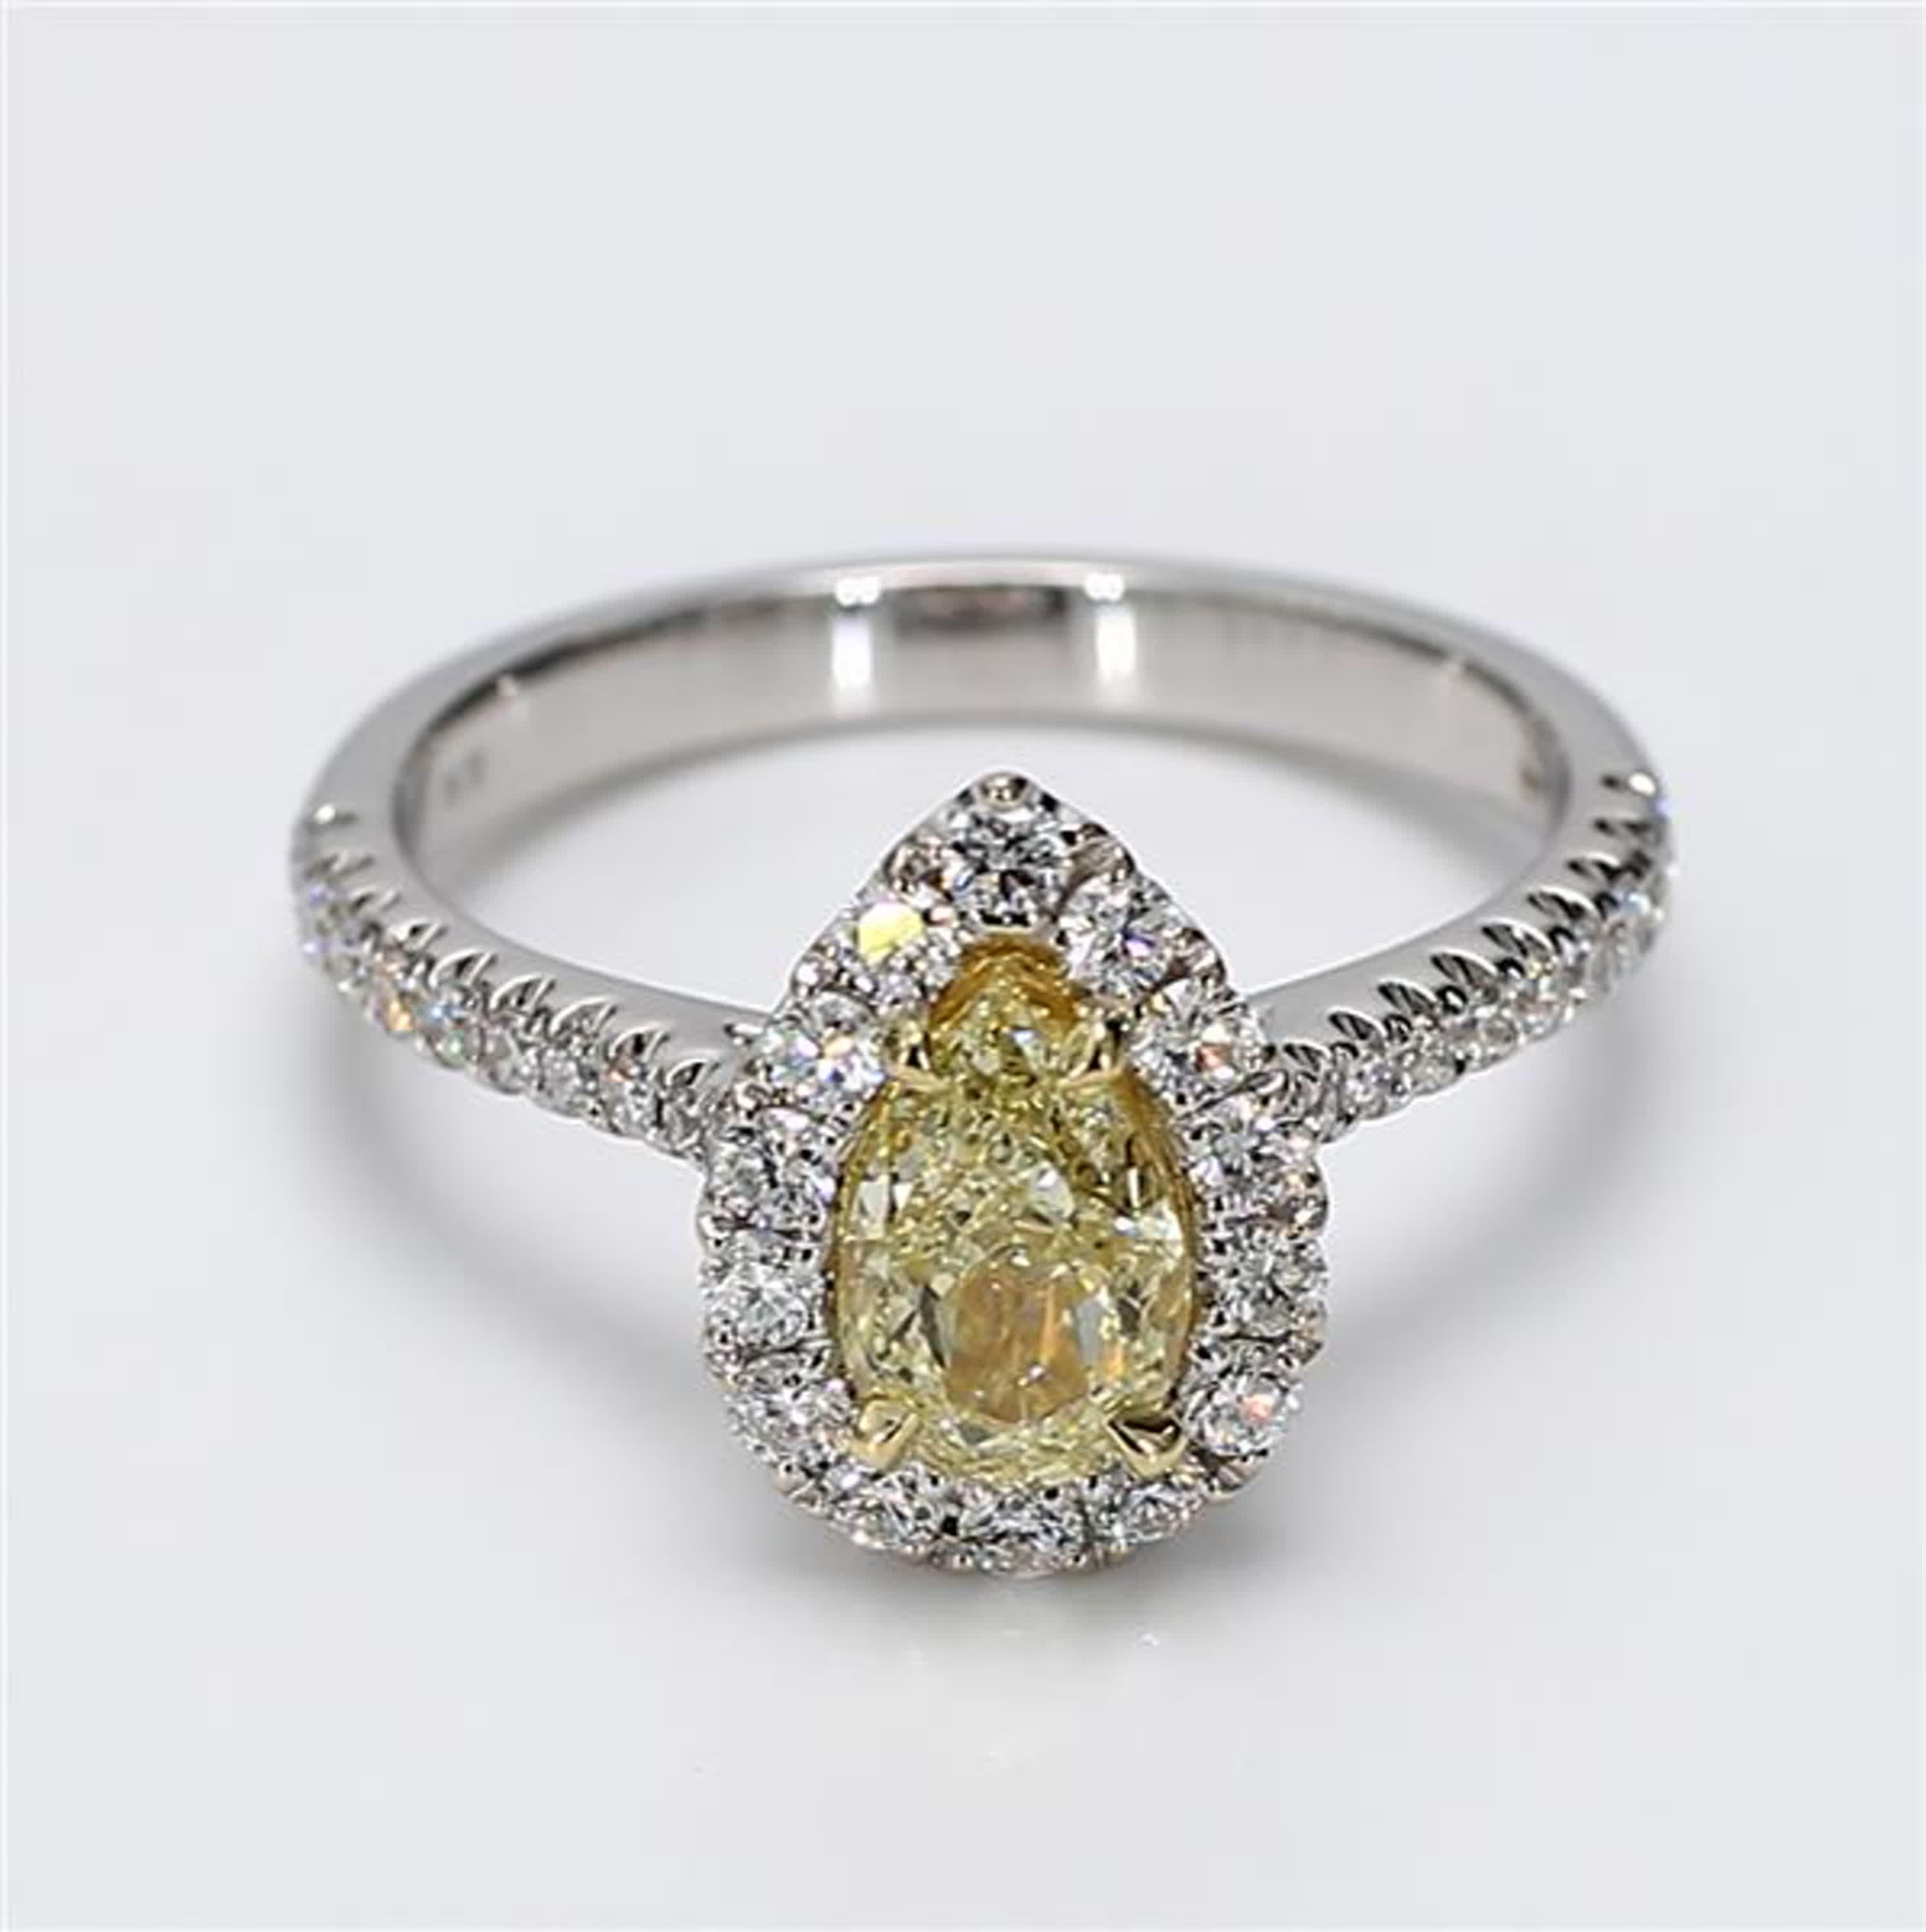 RareGemWorld's classic GIA certified diamond ring. Mounted in a beautiful 18K Yellow and White Gold setting with a natural pear cut yellow diamond. The yellow diamond is surrounded by small round natural white diamond melee. This ring is guaranteed